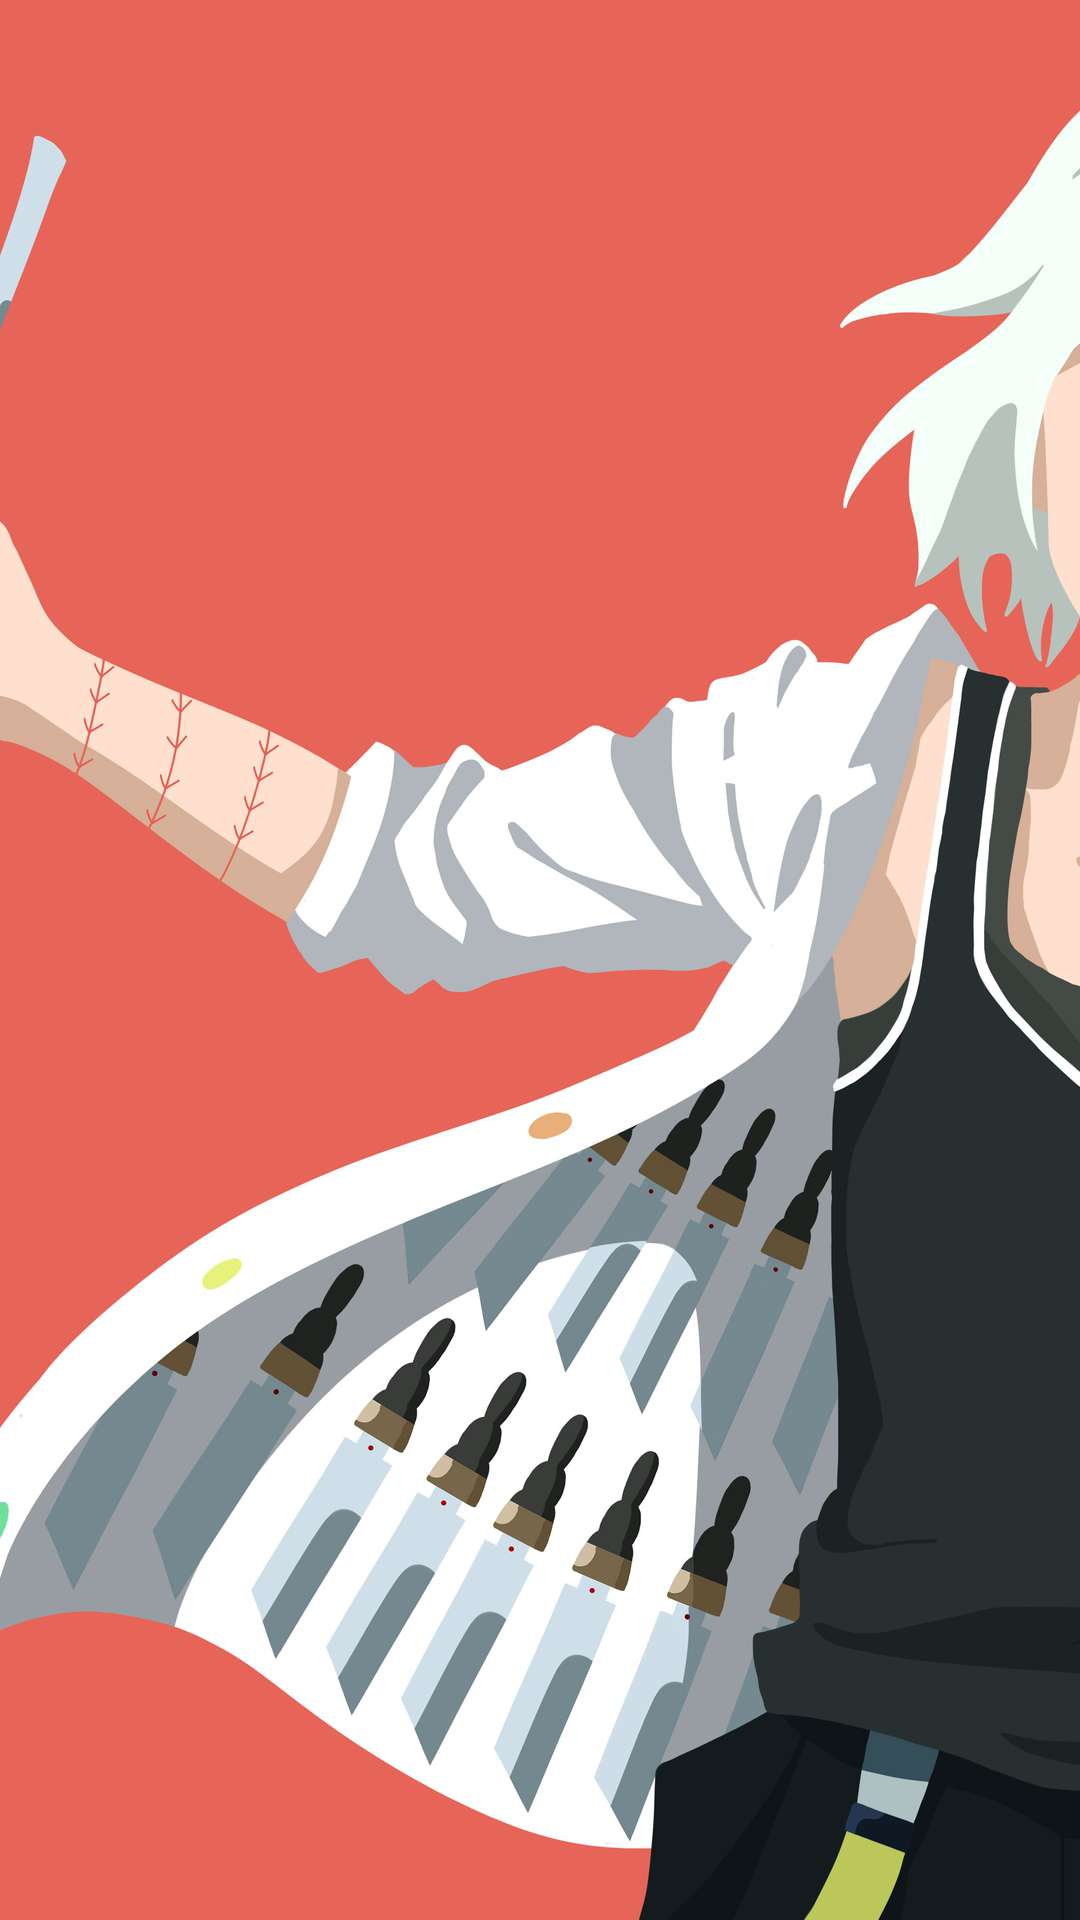 7620 Anime Minimalist Wallpaper Ultra Wide  Android  iPhone HD  Wallpaper Background Download HD Wallpapers Desktop Background  Android   iPhone 1080p 4k 1080x452 2023